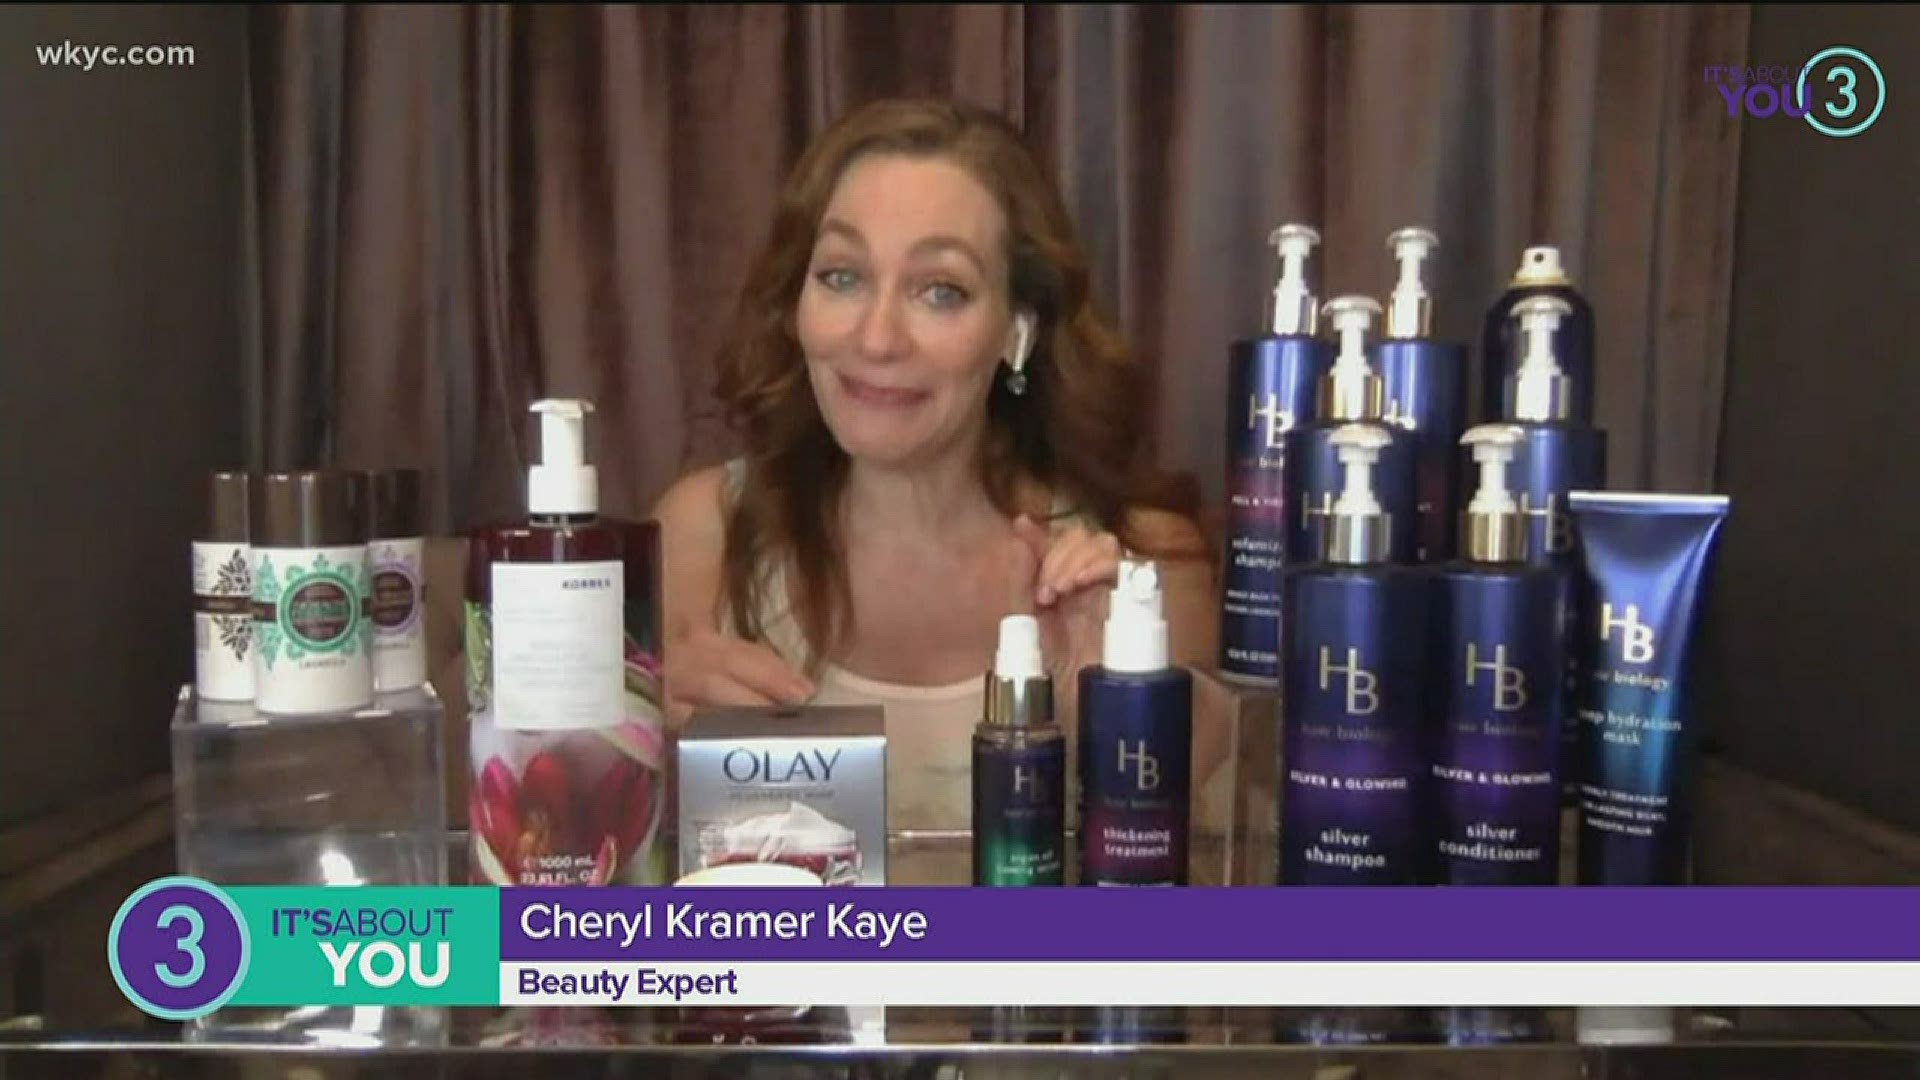 Cheryl Kramer Kaye tells Alexa about some amazing products you can easily get your hands on to combat what summer throws at you!